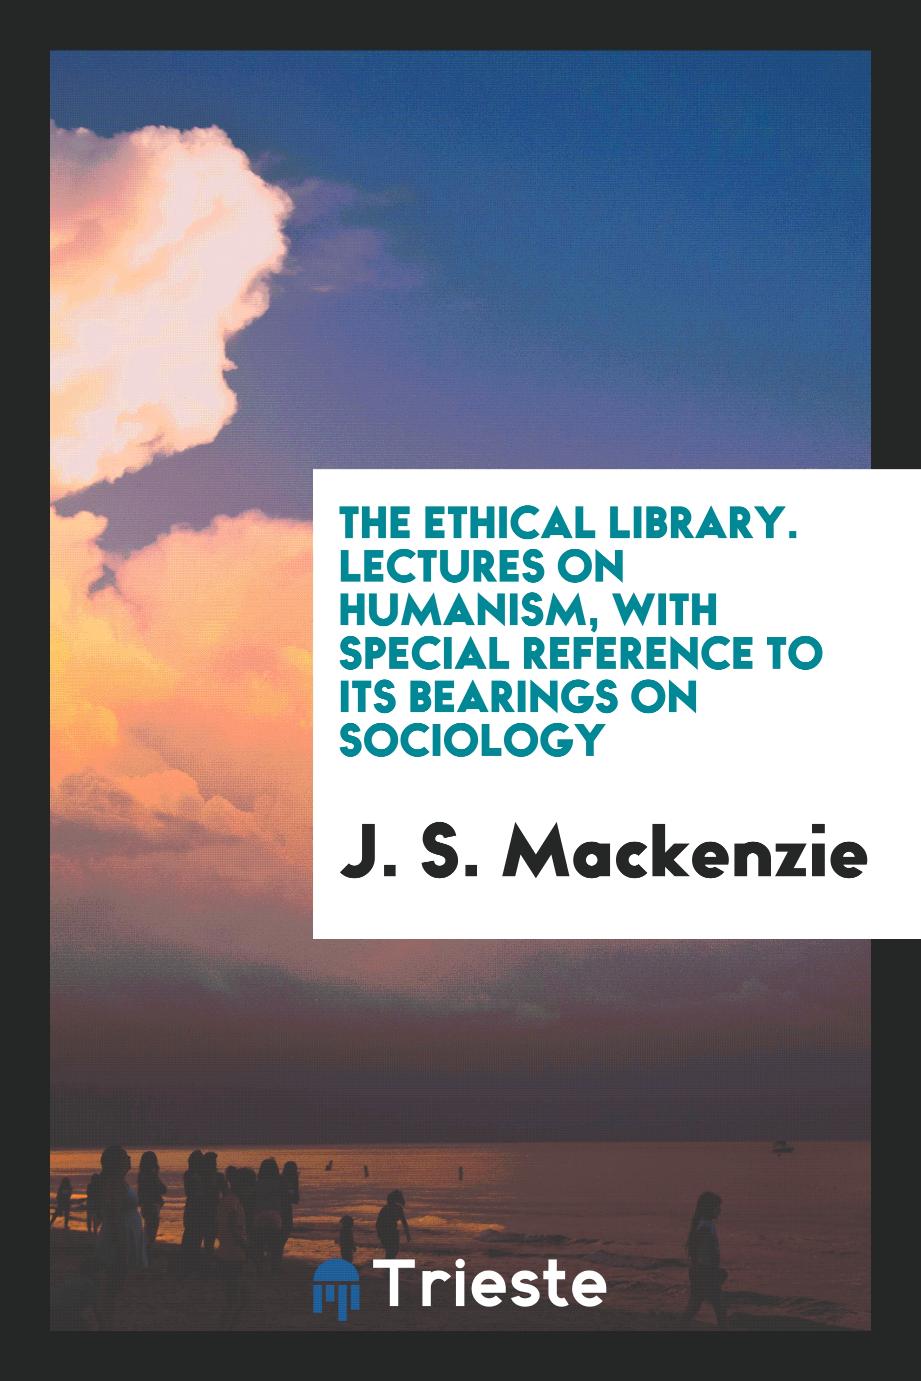 The ethical library. Lectures on humanism, with special reference to its bearings on sociology